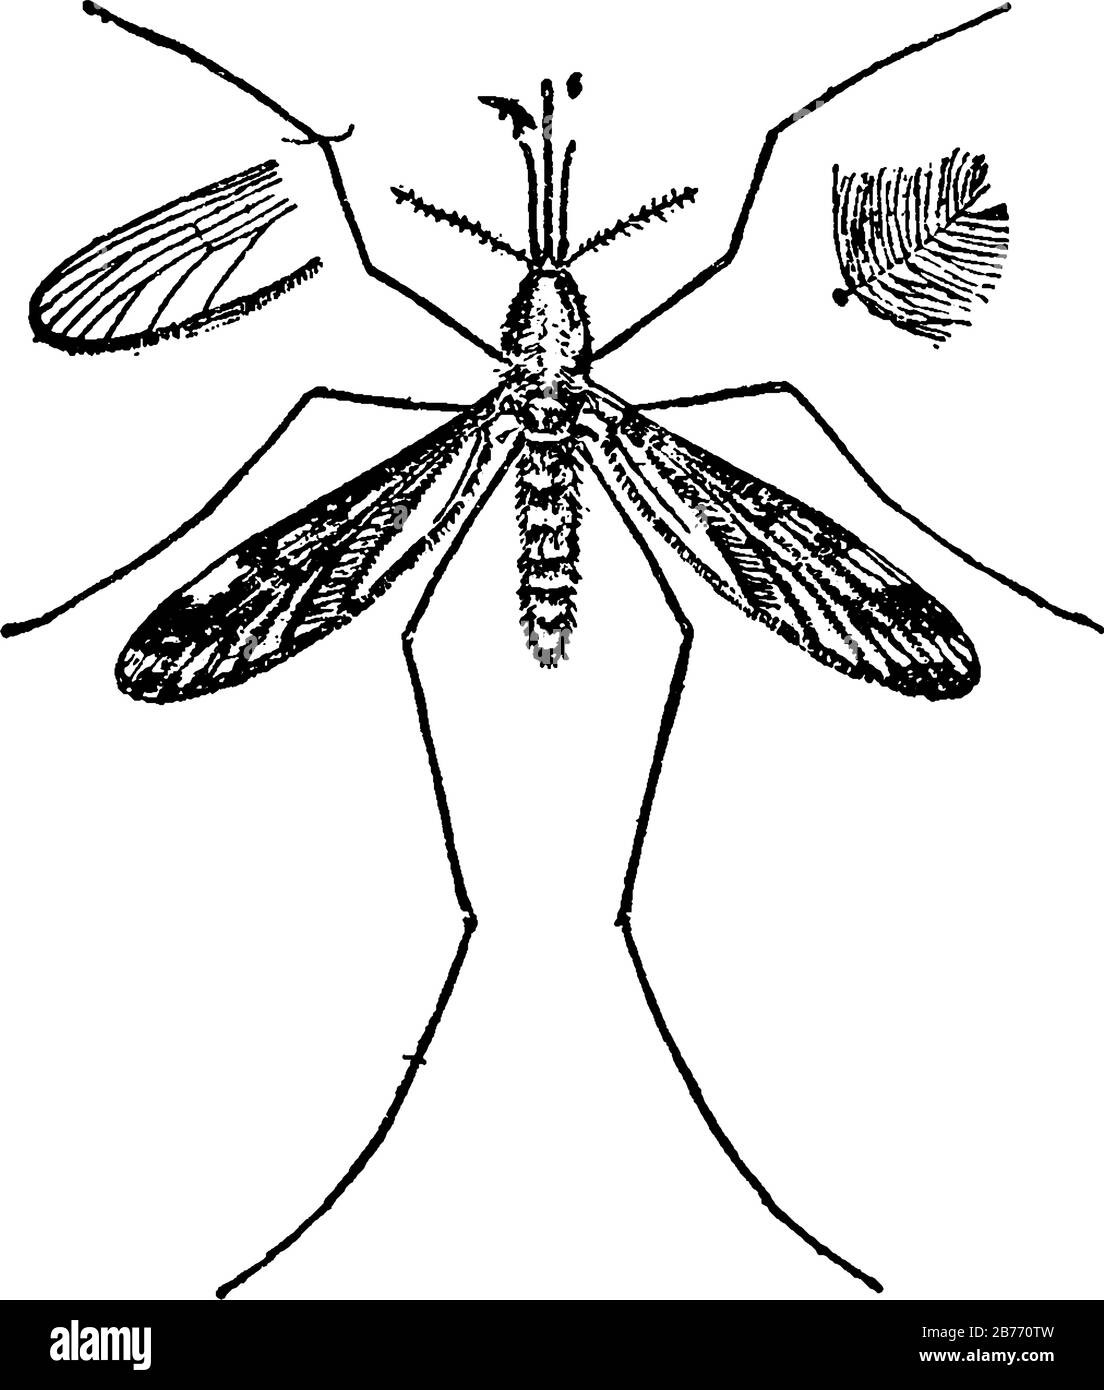 Adult harmless mosquito with a skinny, segmented body, a pair of wings, three pairs of long hair-like legs, feathery antennae, and elongated mouthpart Stock Vector